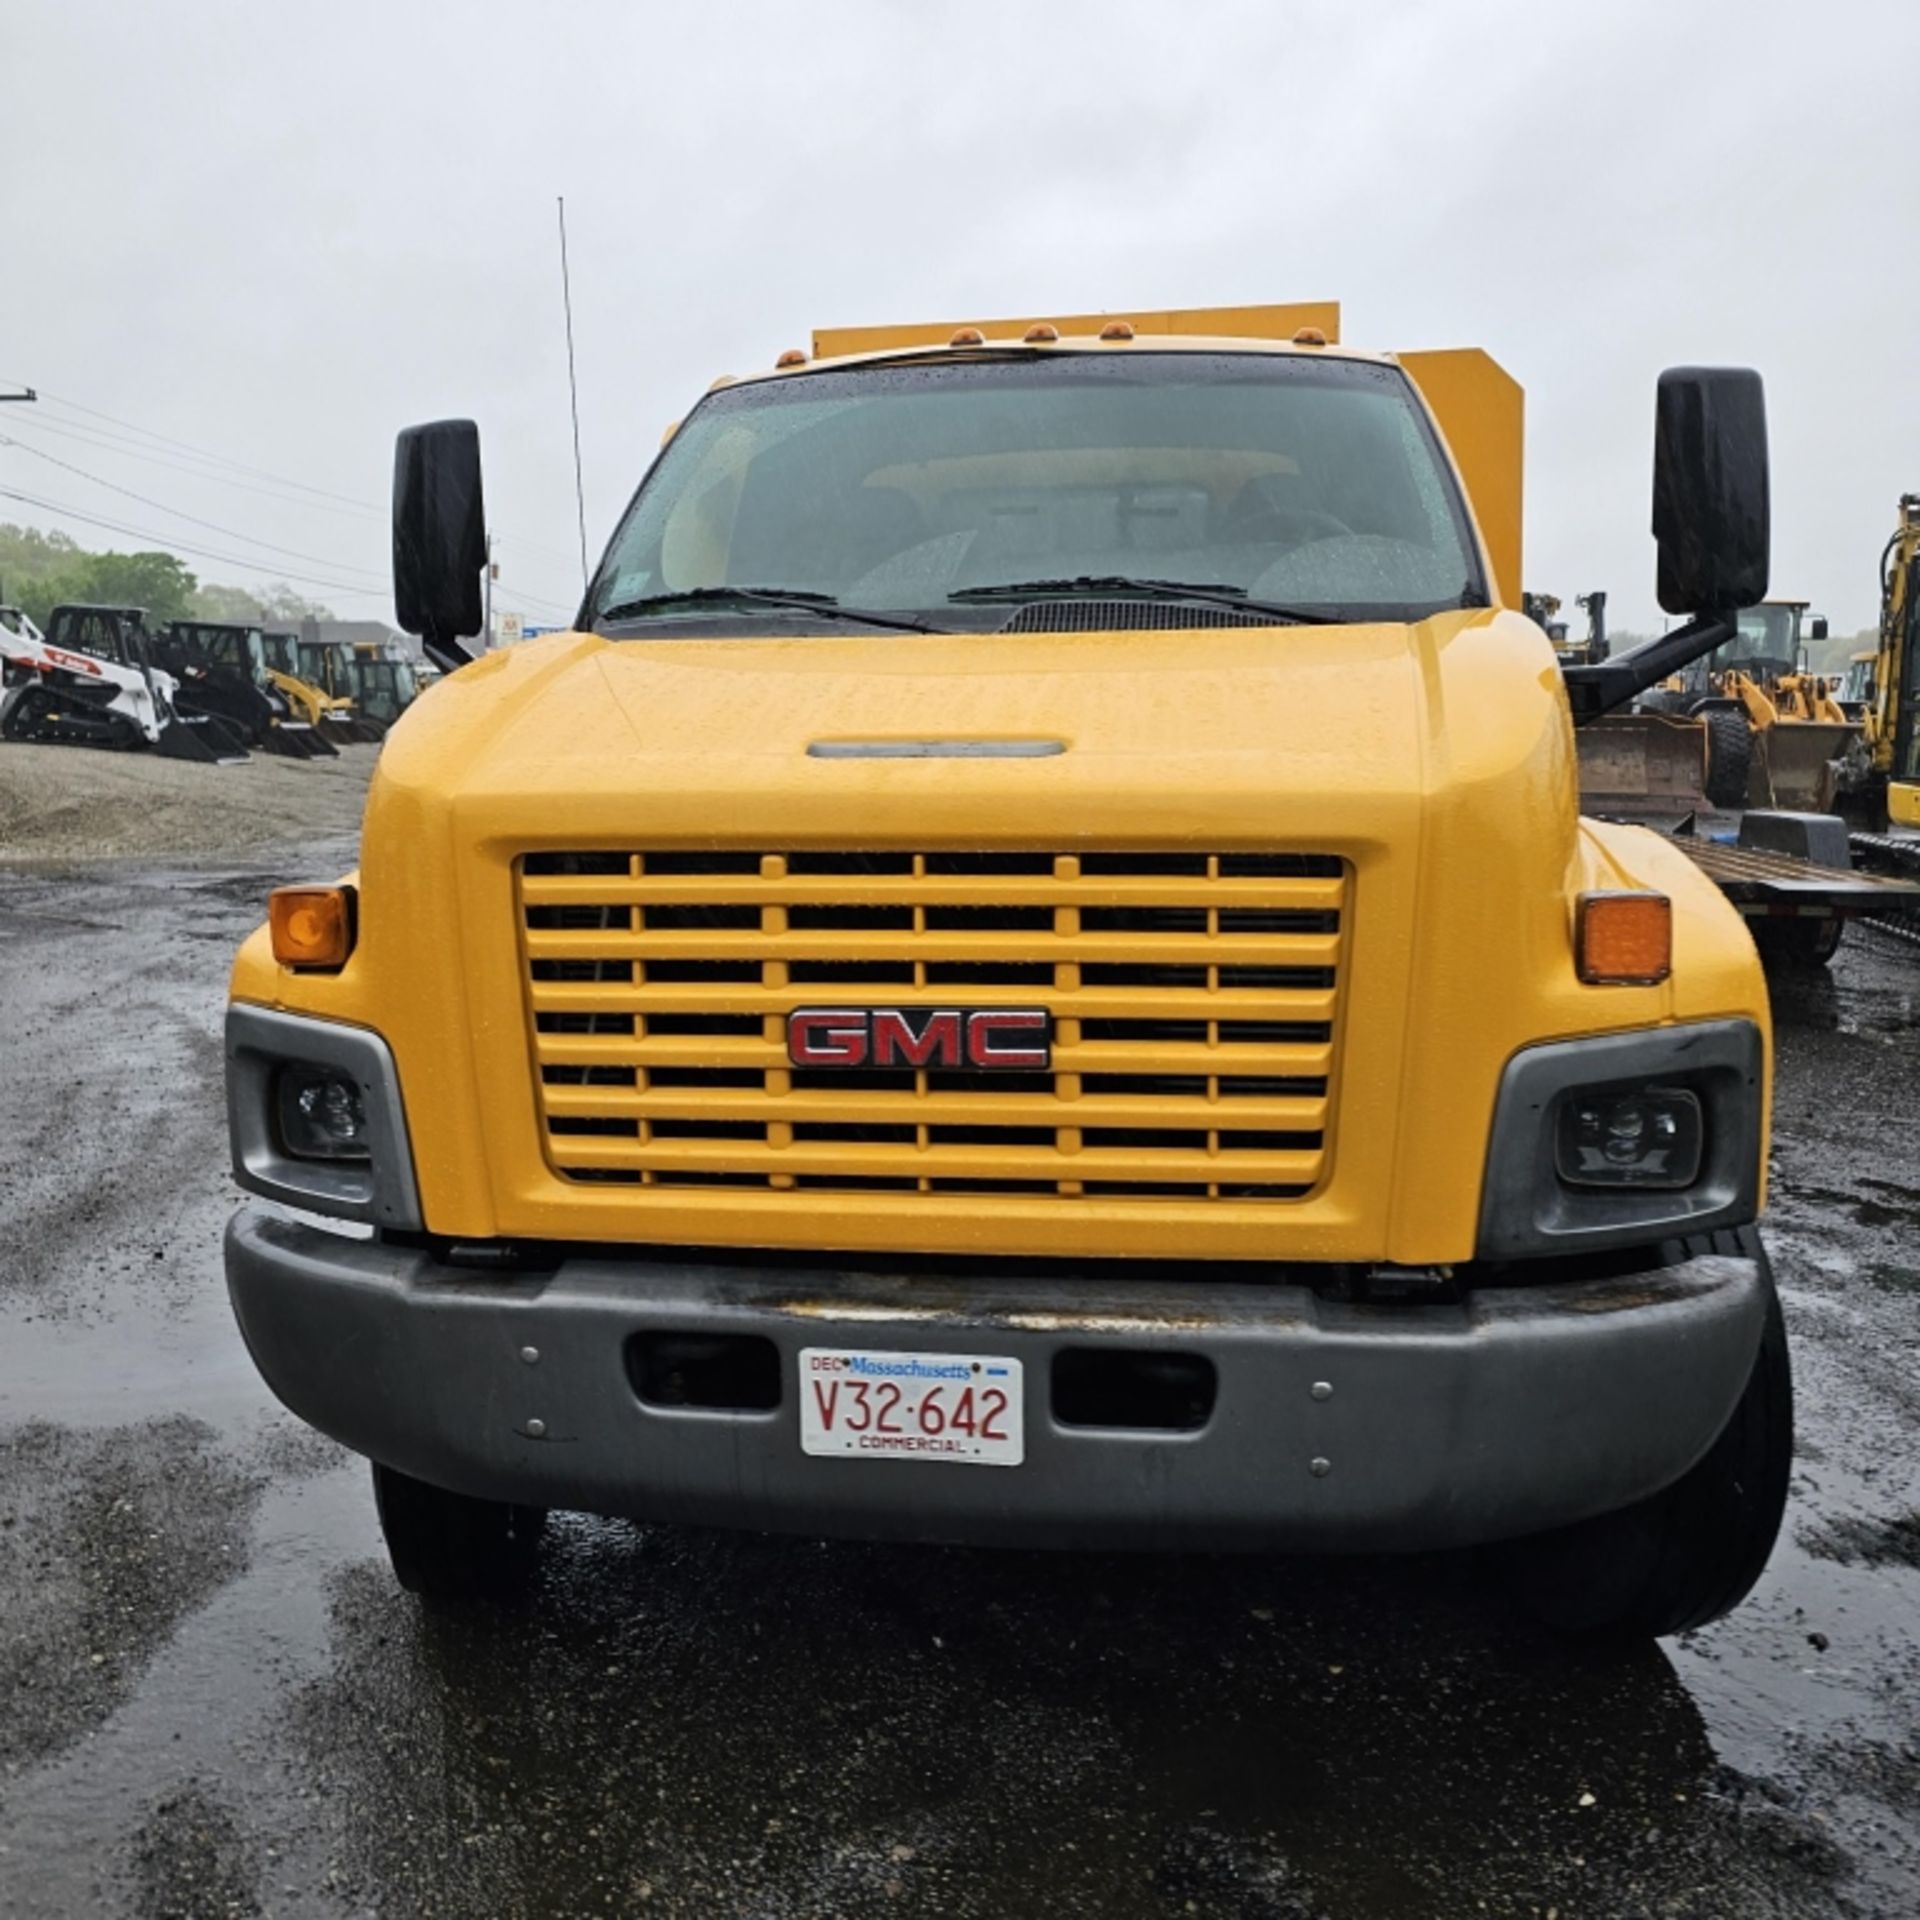 2004 Chevy C6500 Service Truck - Image 3 of 11